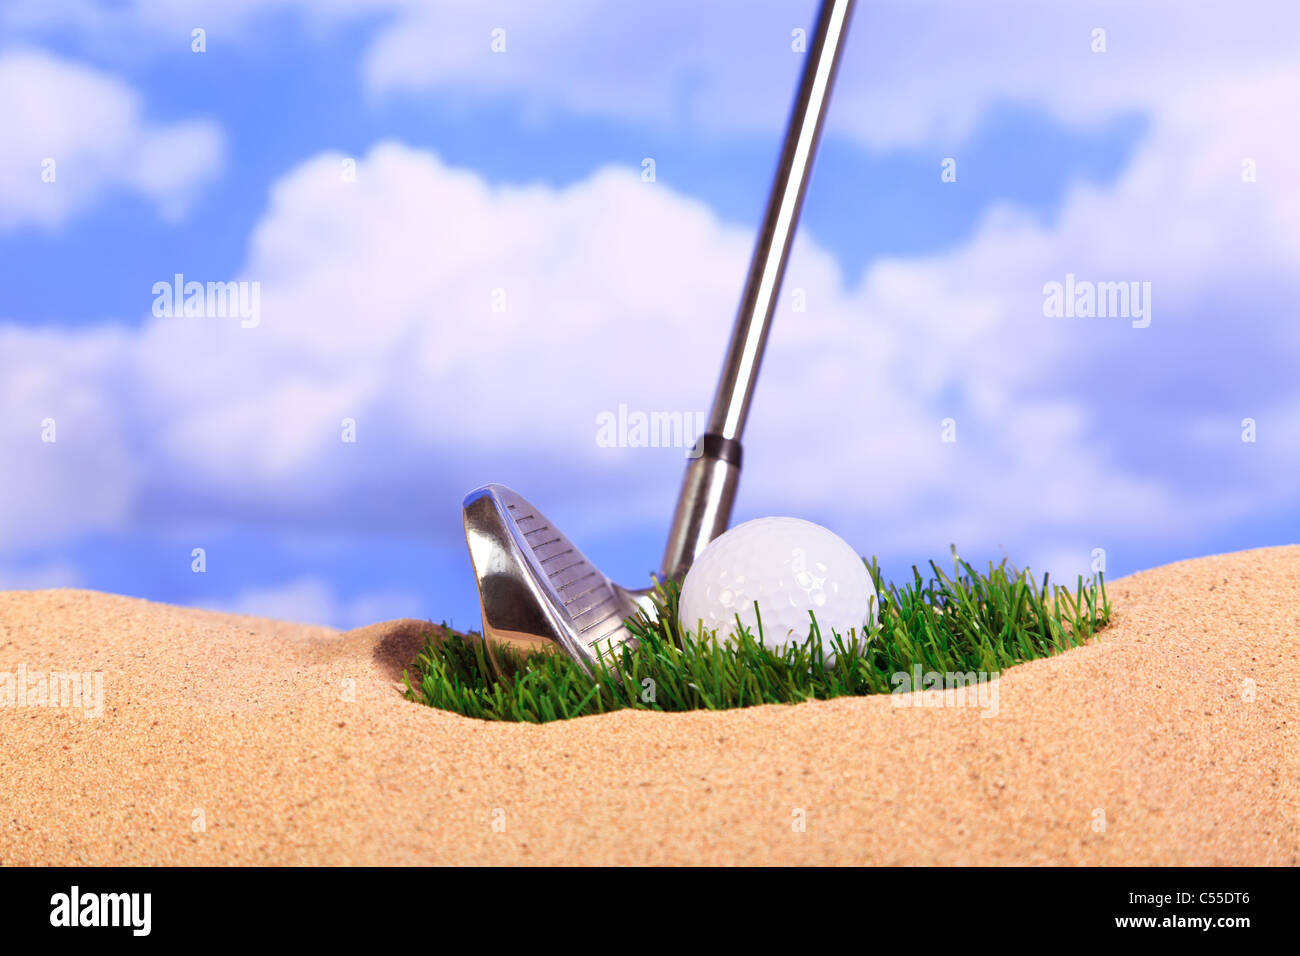 Golf concept photo of a ball lying on a patch of grass in a bunker. Stock Photo